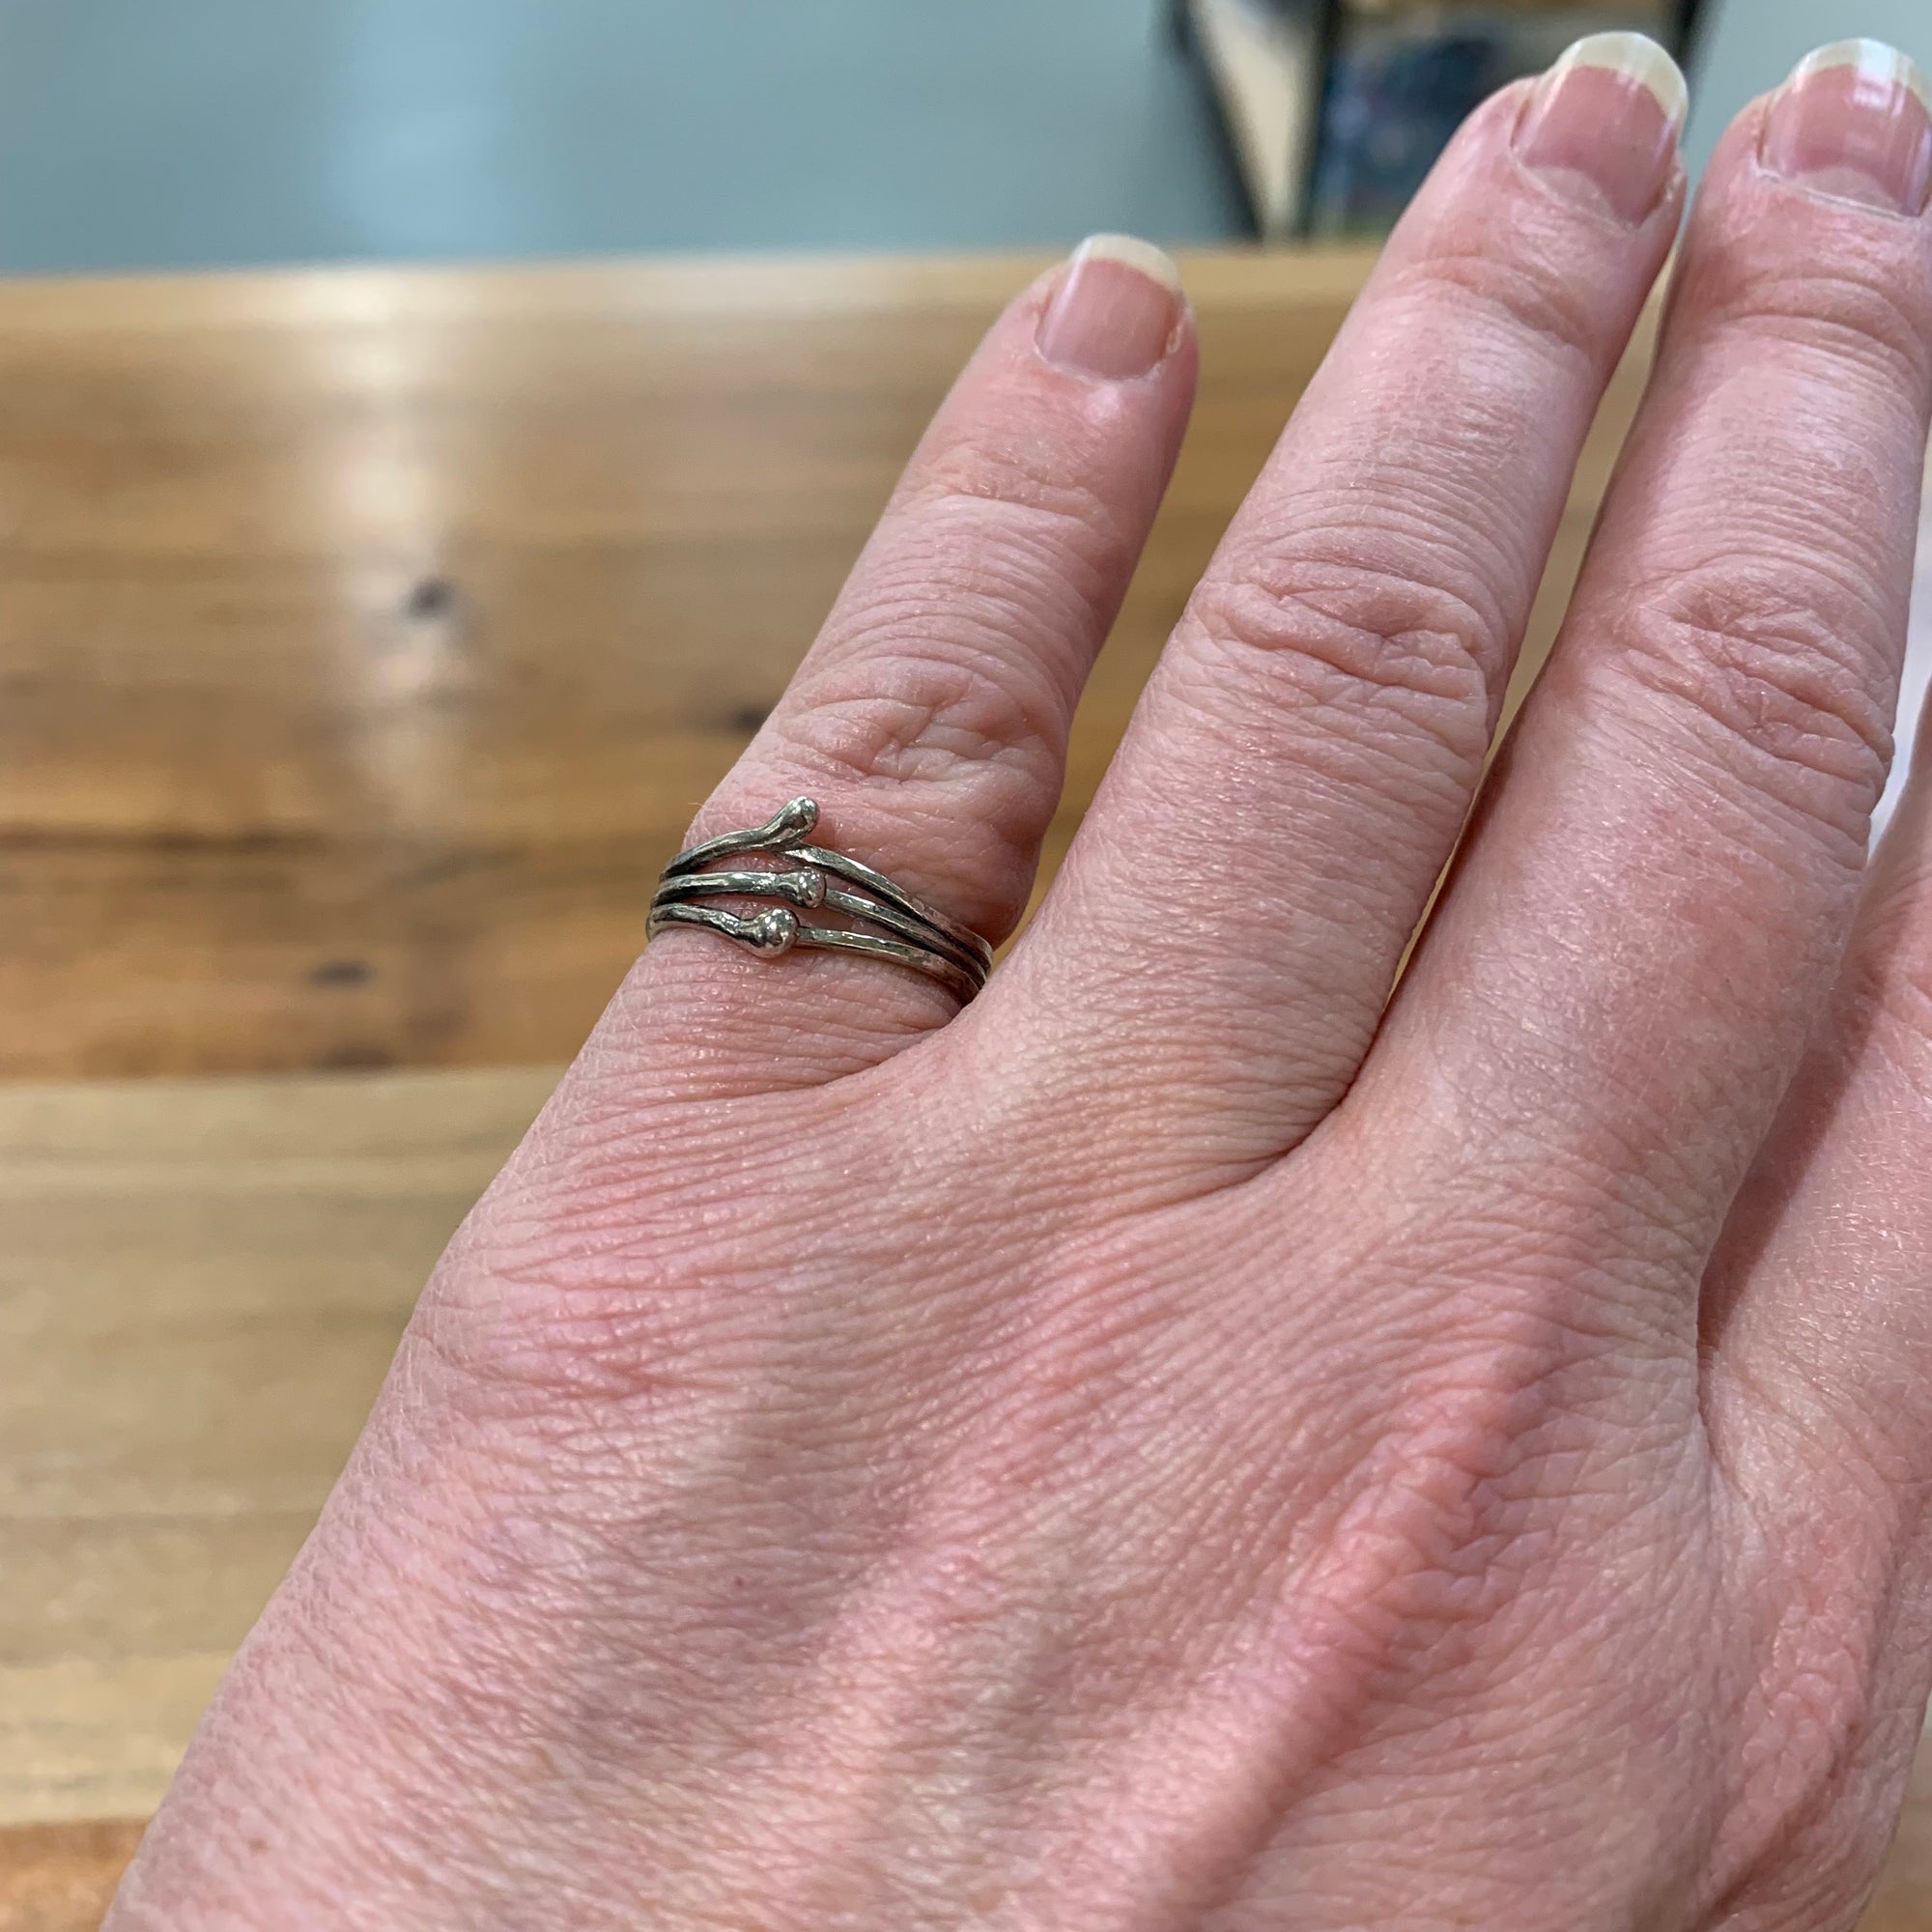 Woman wearing sterling silver pinkie ring, three twisted strands with silver balls